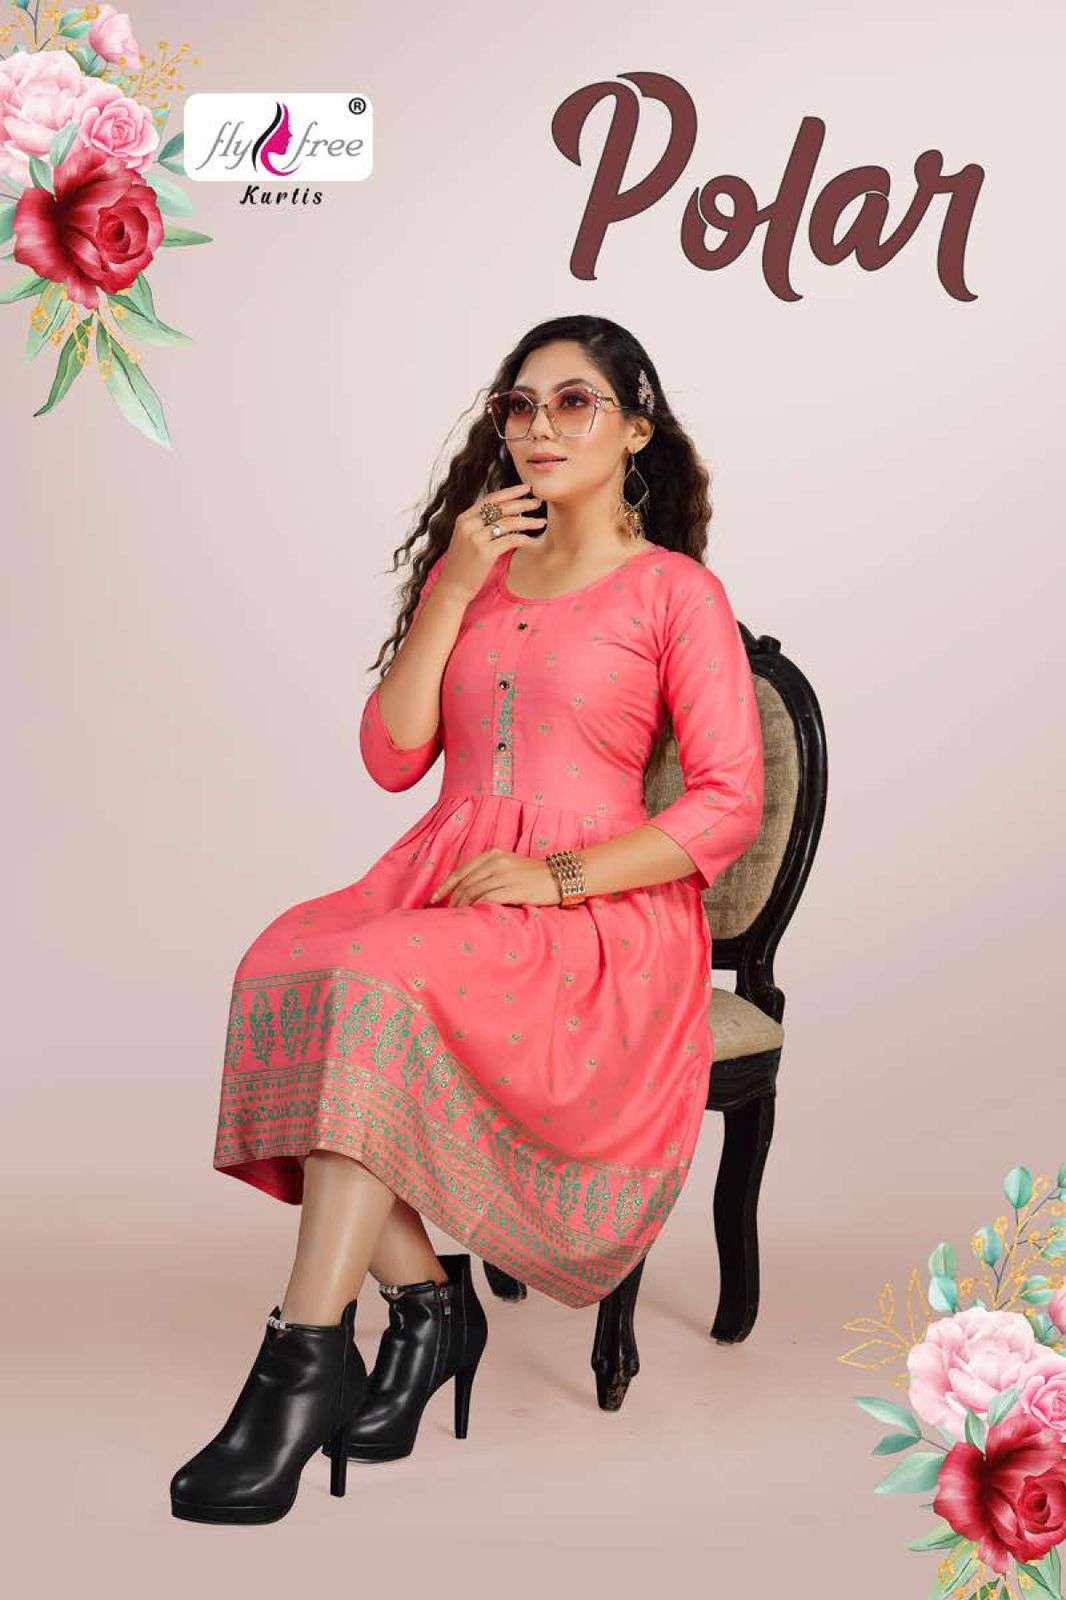 POLAR BY FLY FREE HAEVY RAYON GOLD FOIL PRINT KURTI CATALOG WHOLESLAER BEST RATE